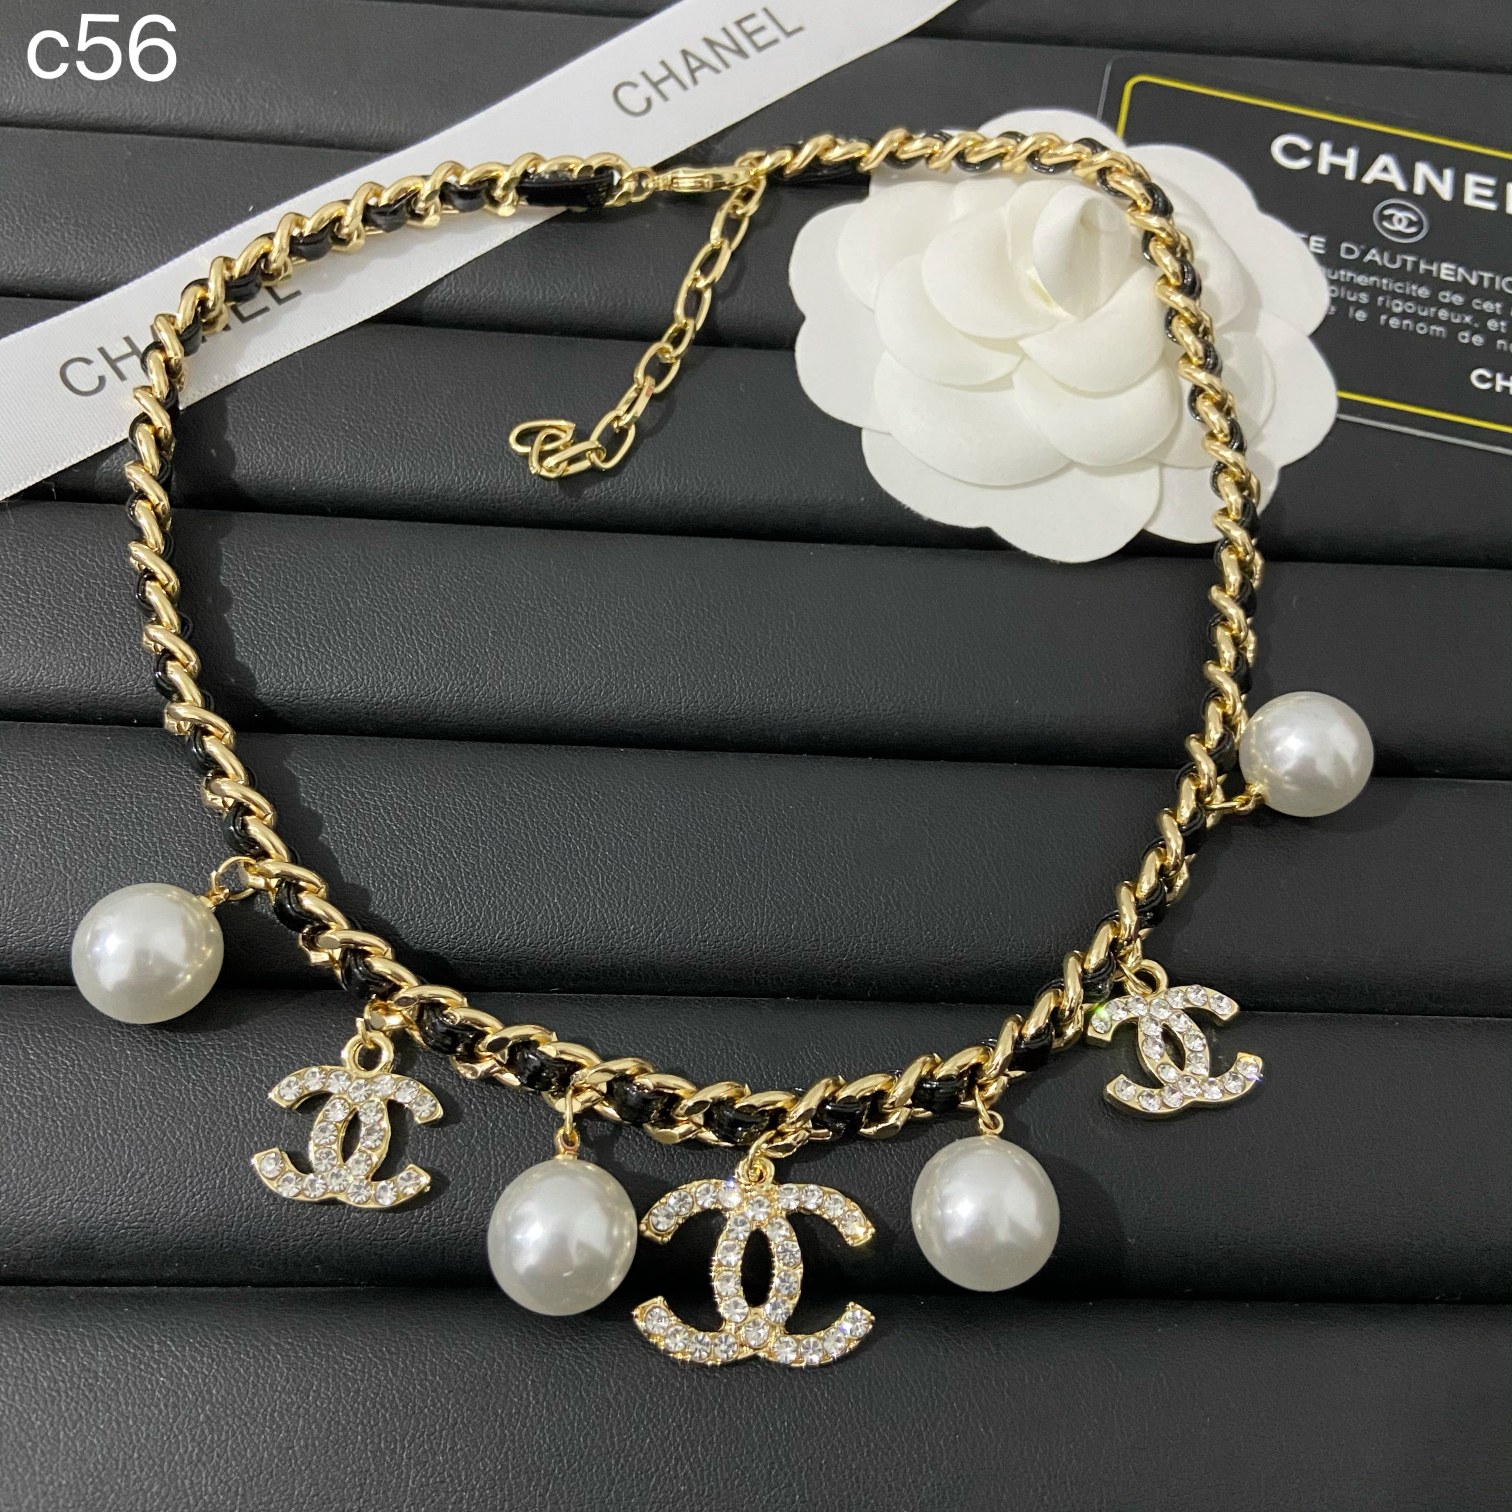 Chanel necklace 107519